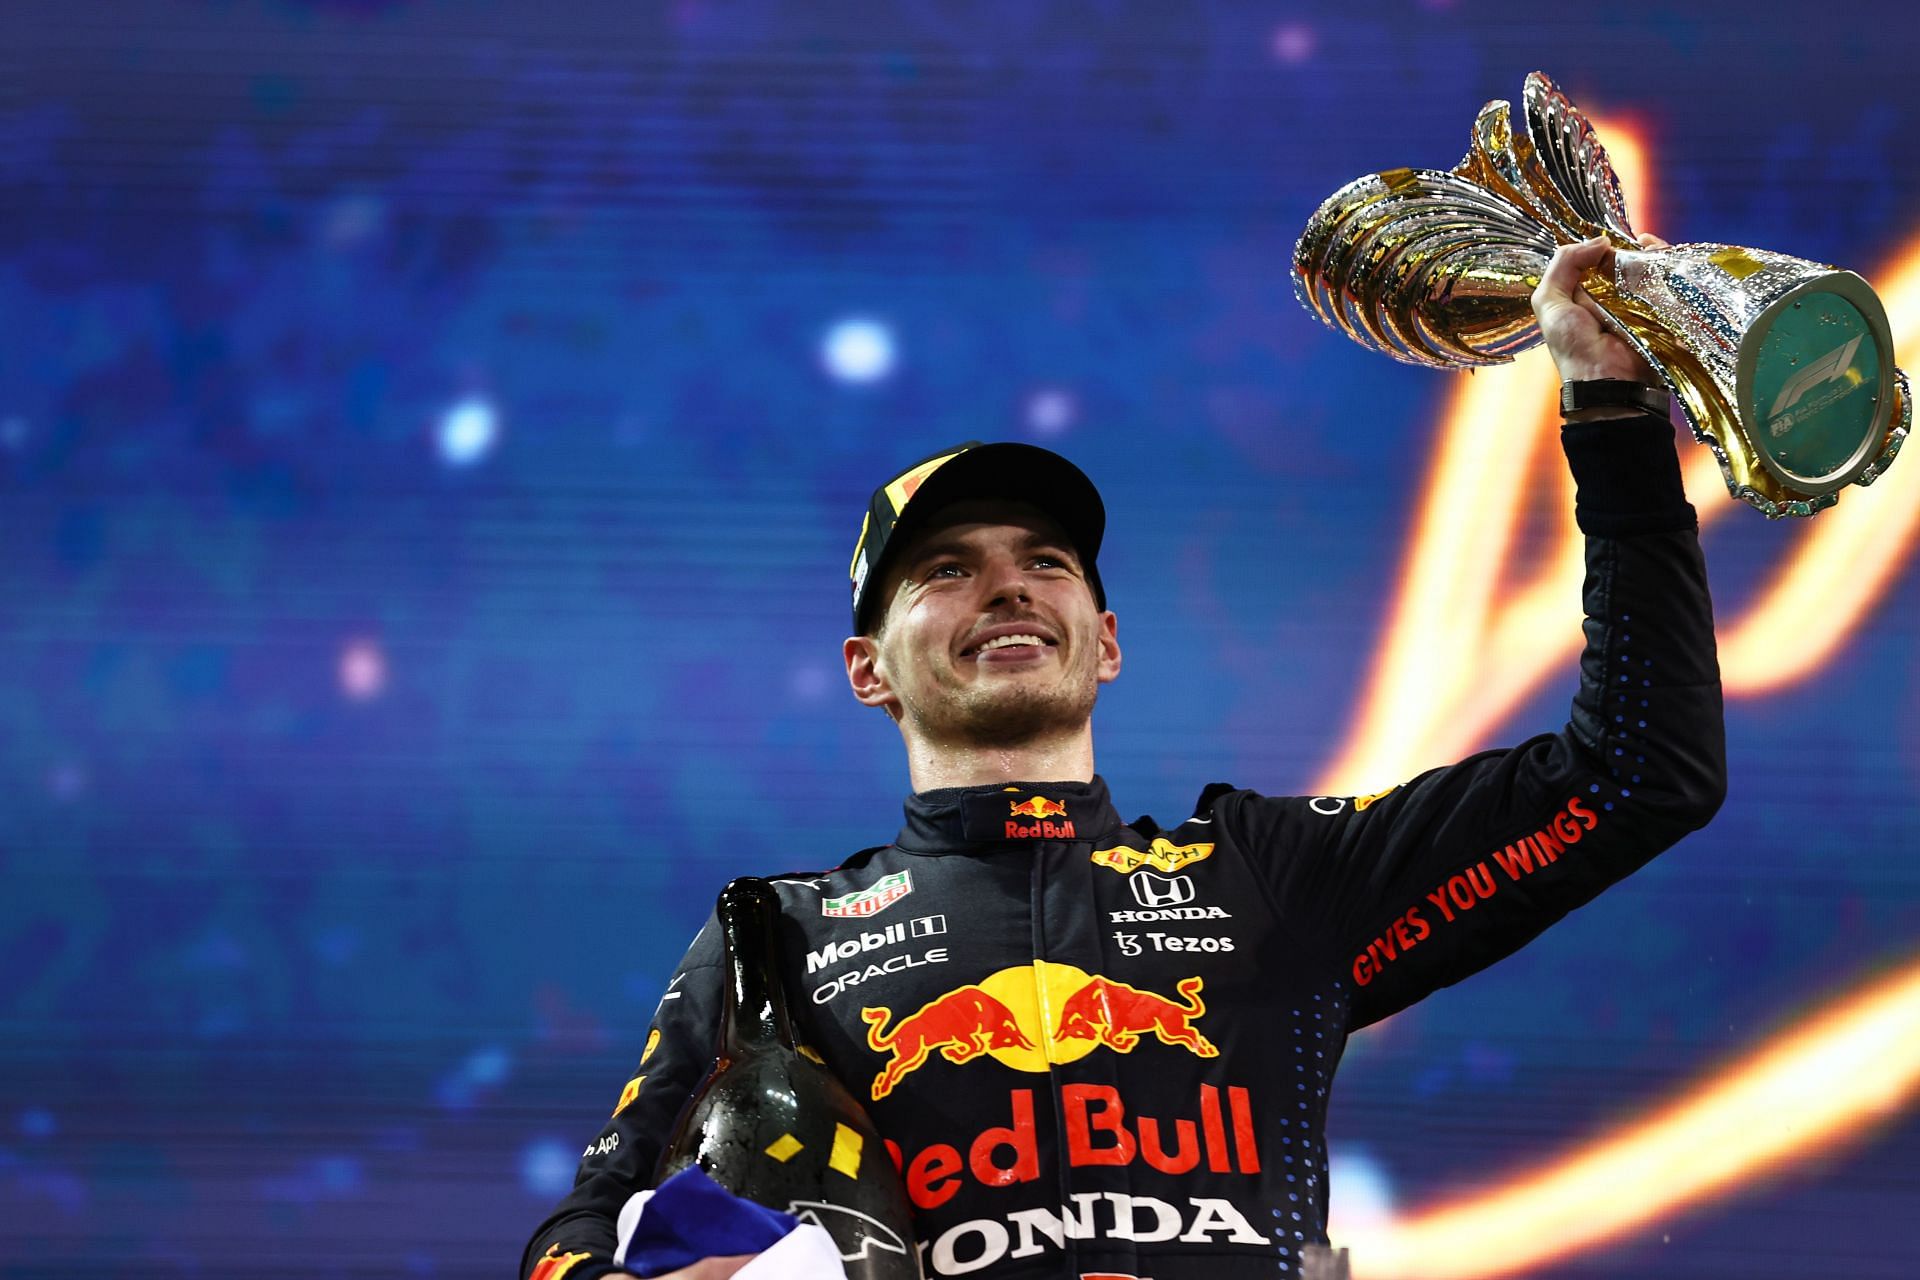 F1 Grand Prix of Abu Dhabi - Max Verstappen wins the 2021 Formula One World Championship (Photo by Mark Thompson/Getty Images)